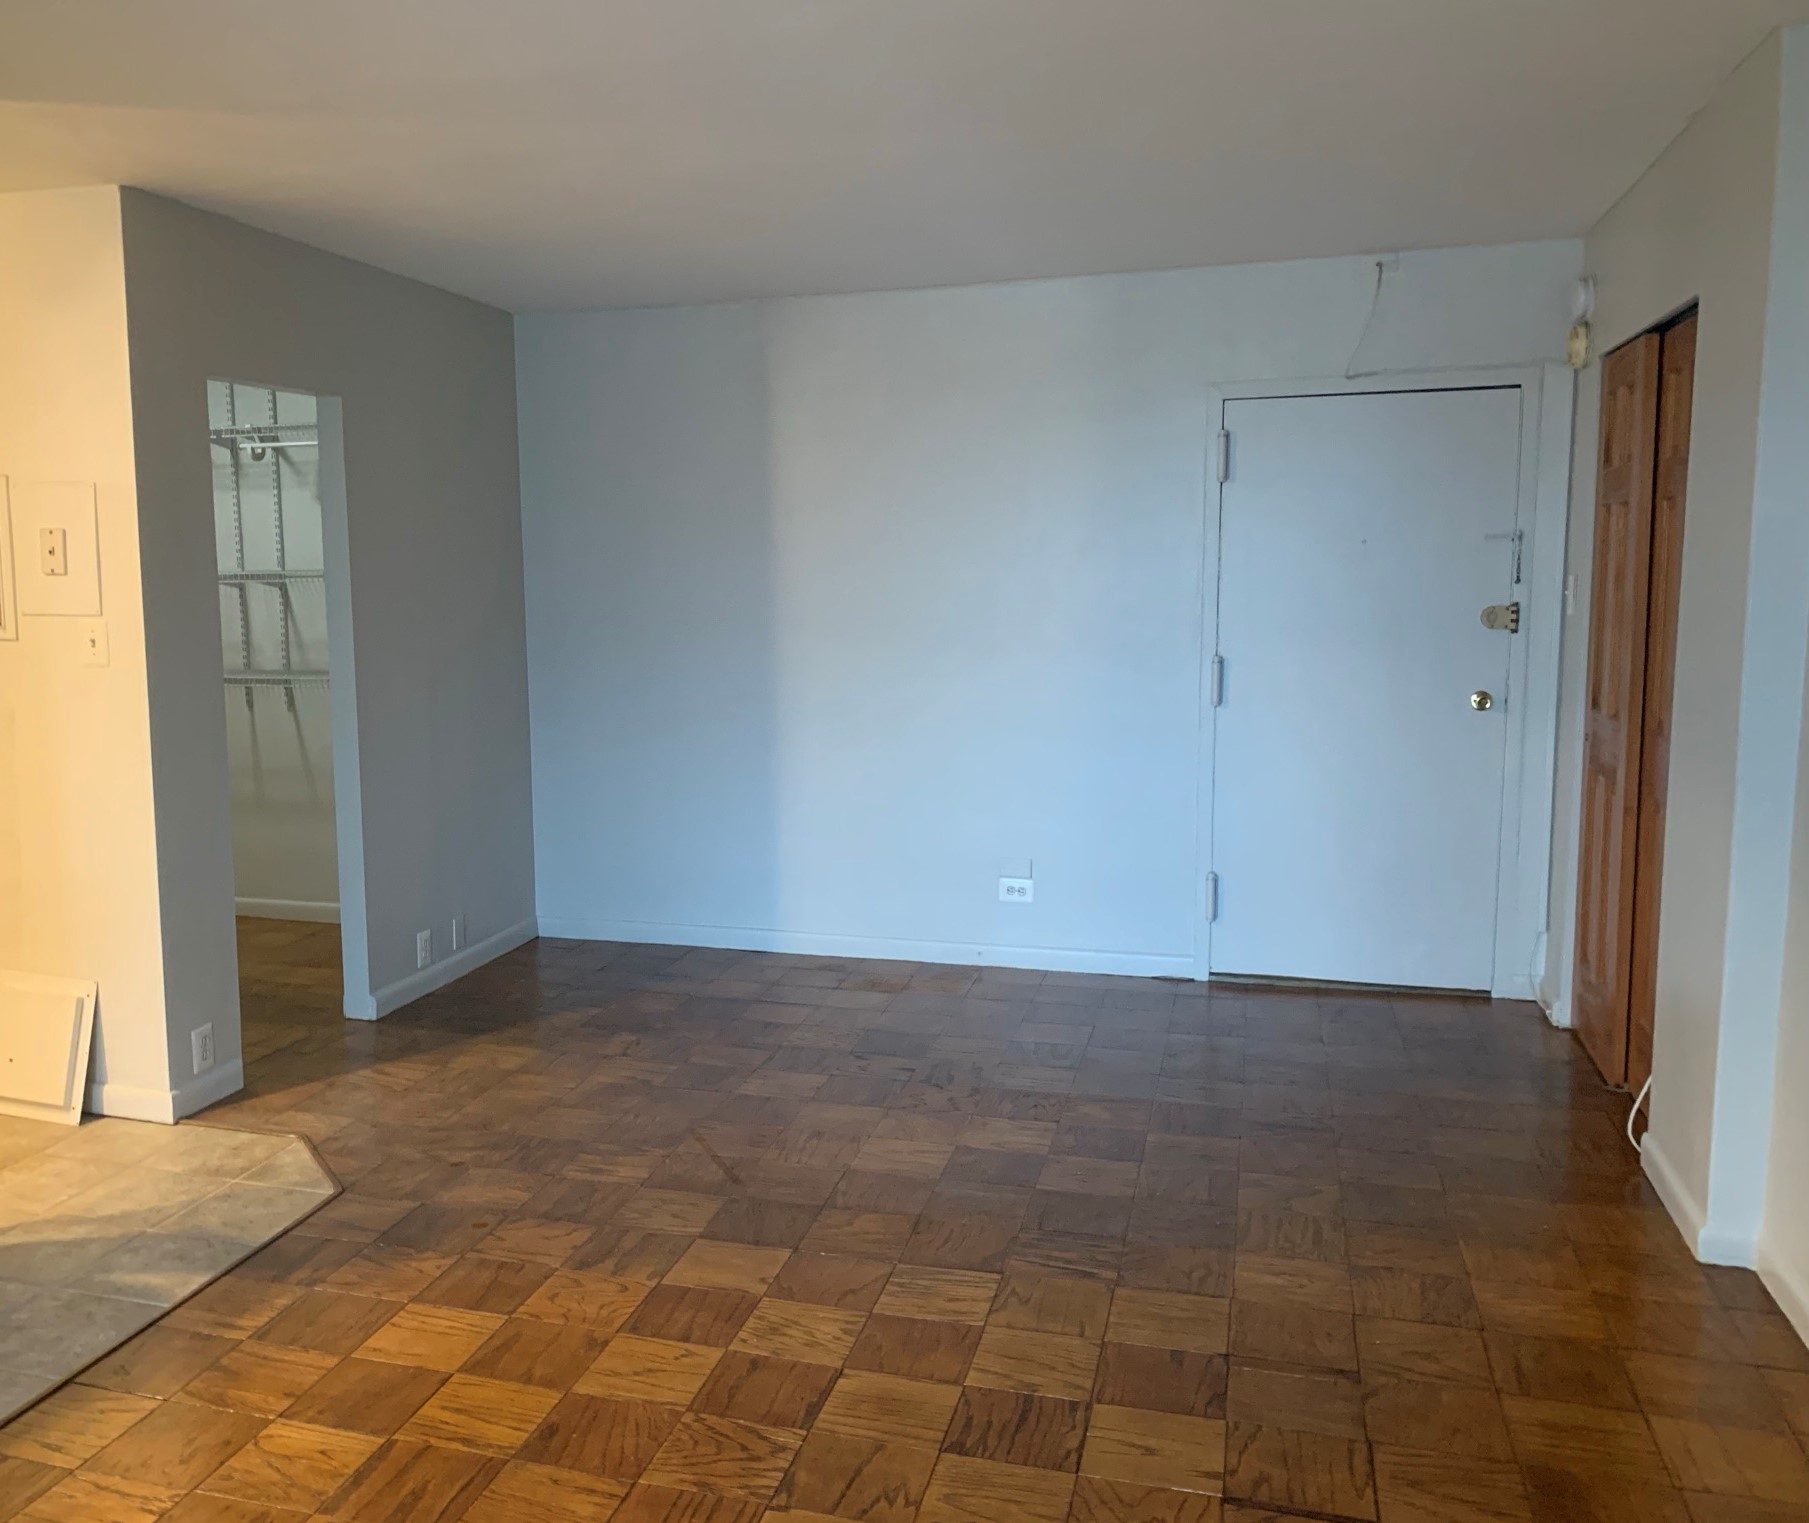 Dupont Circle Studio. All Utilities Included! – 1260 21st St NW #710